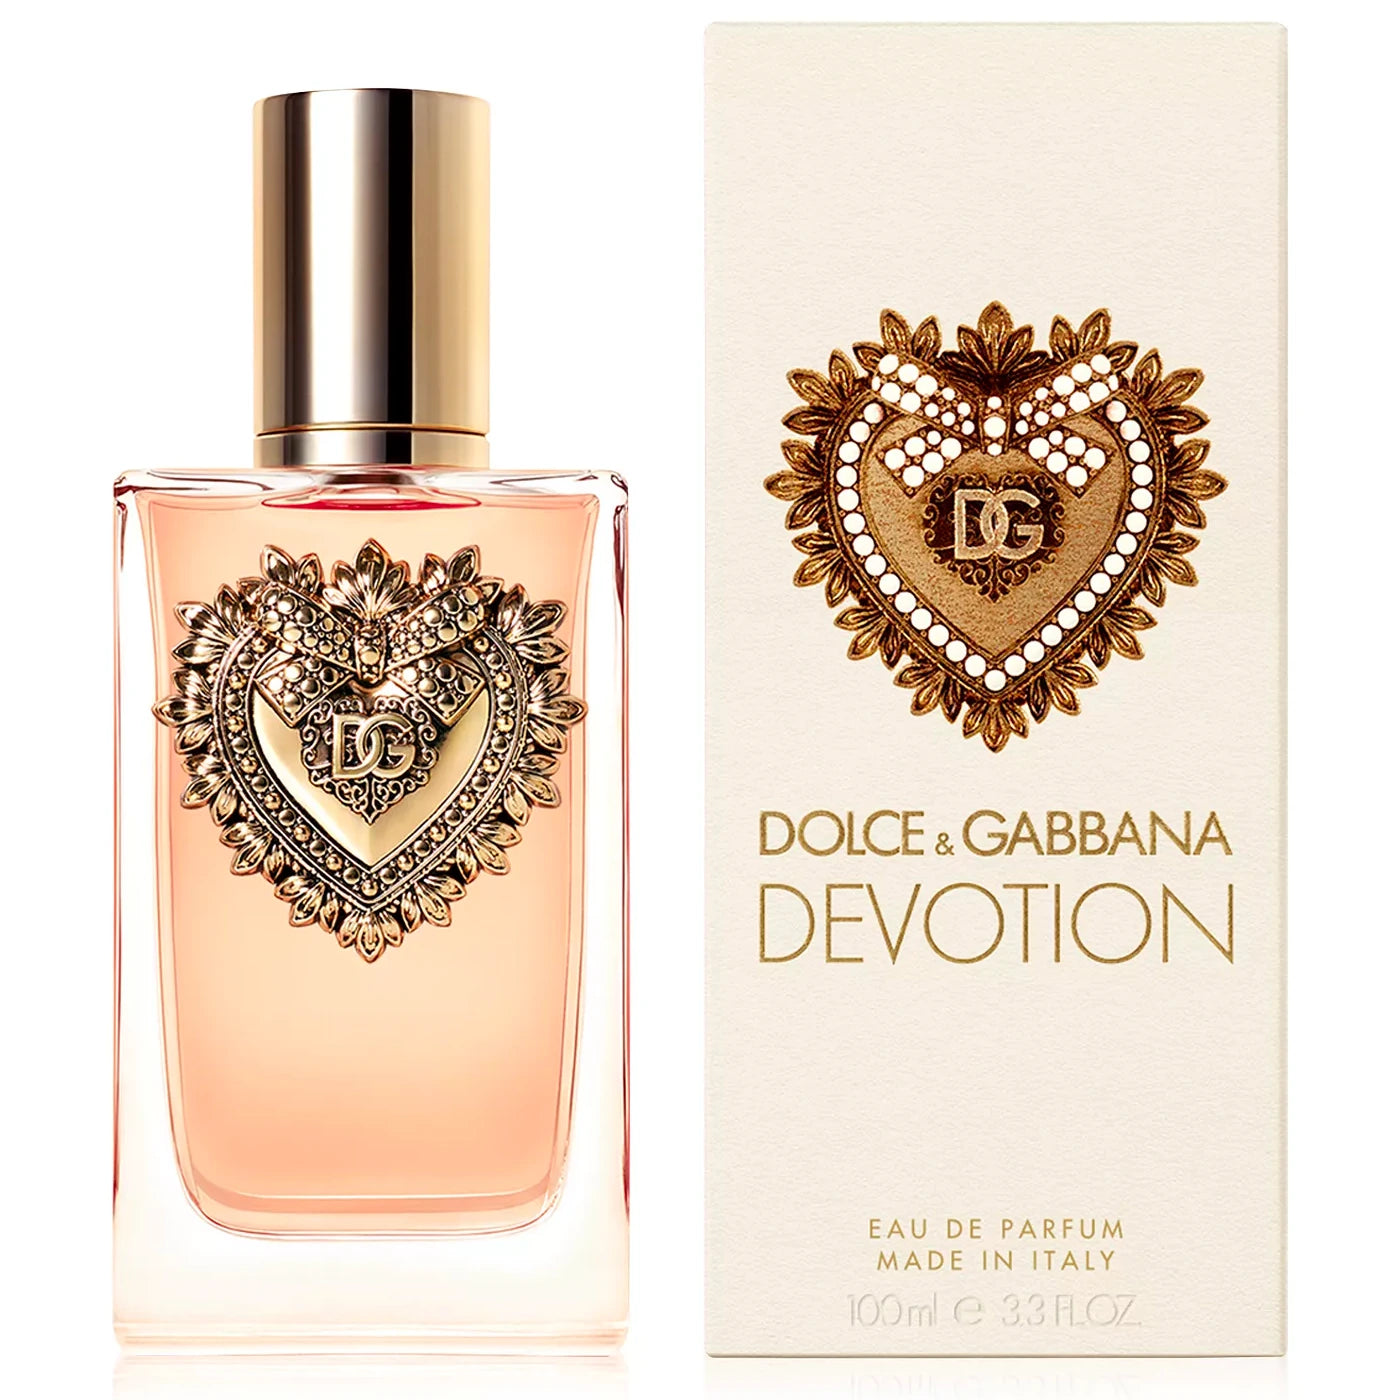 <p data-mce-fragment="1">This luxurious and exclusive scent from Dolce &amp; Gabbana captures the timeless beauty and allure of femininity. Experience tantalizing top notes of candied citrus, a heart note of sweet orange blossom, and a base note of luxurious vanilla. Devotion Eau de Parfum offers long-lasting allure and comes in a travel size, perfect for the modern, sophisticated woman on the go.</p>